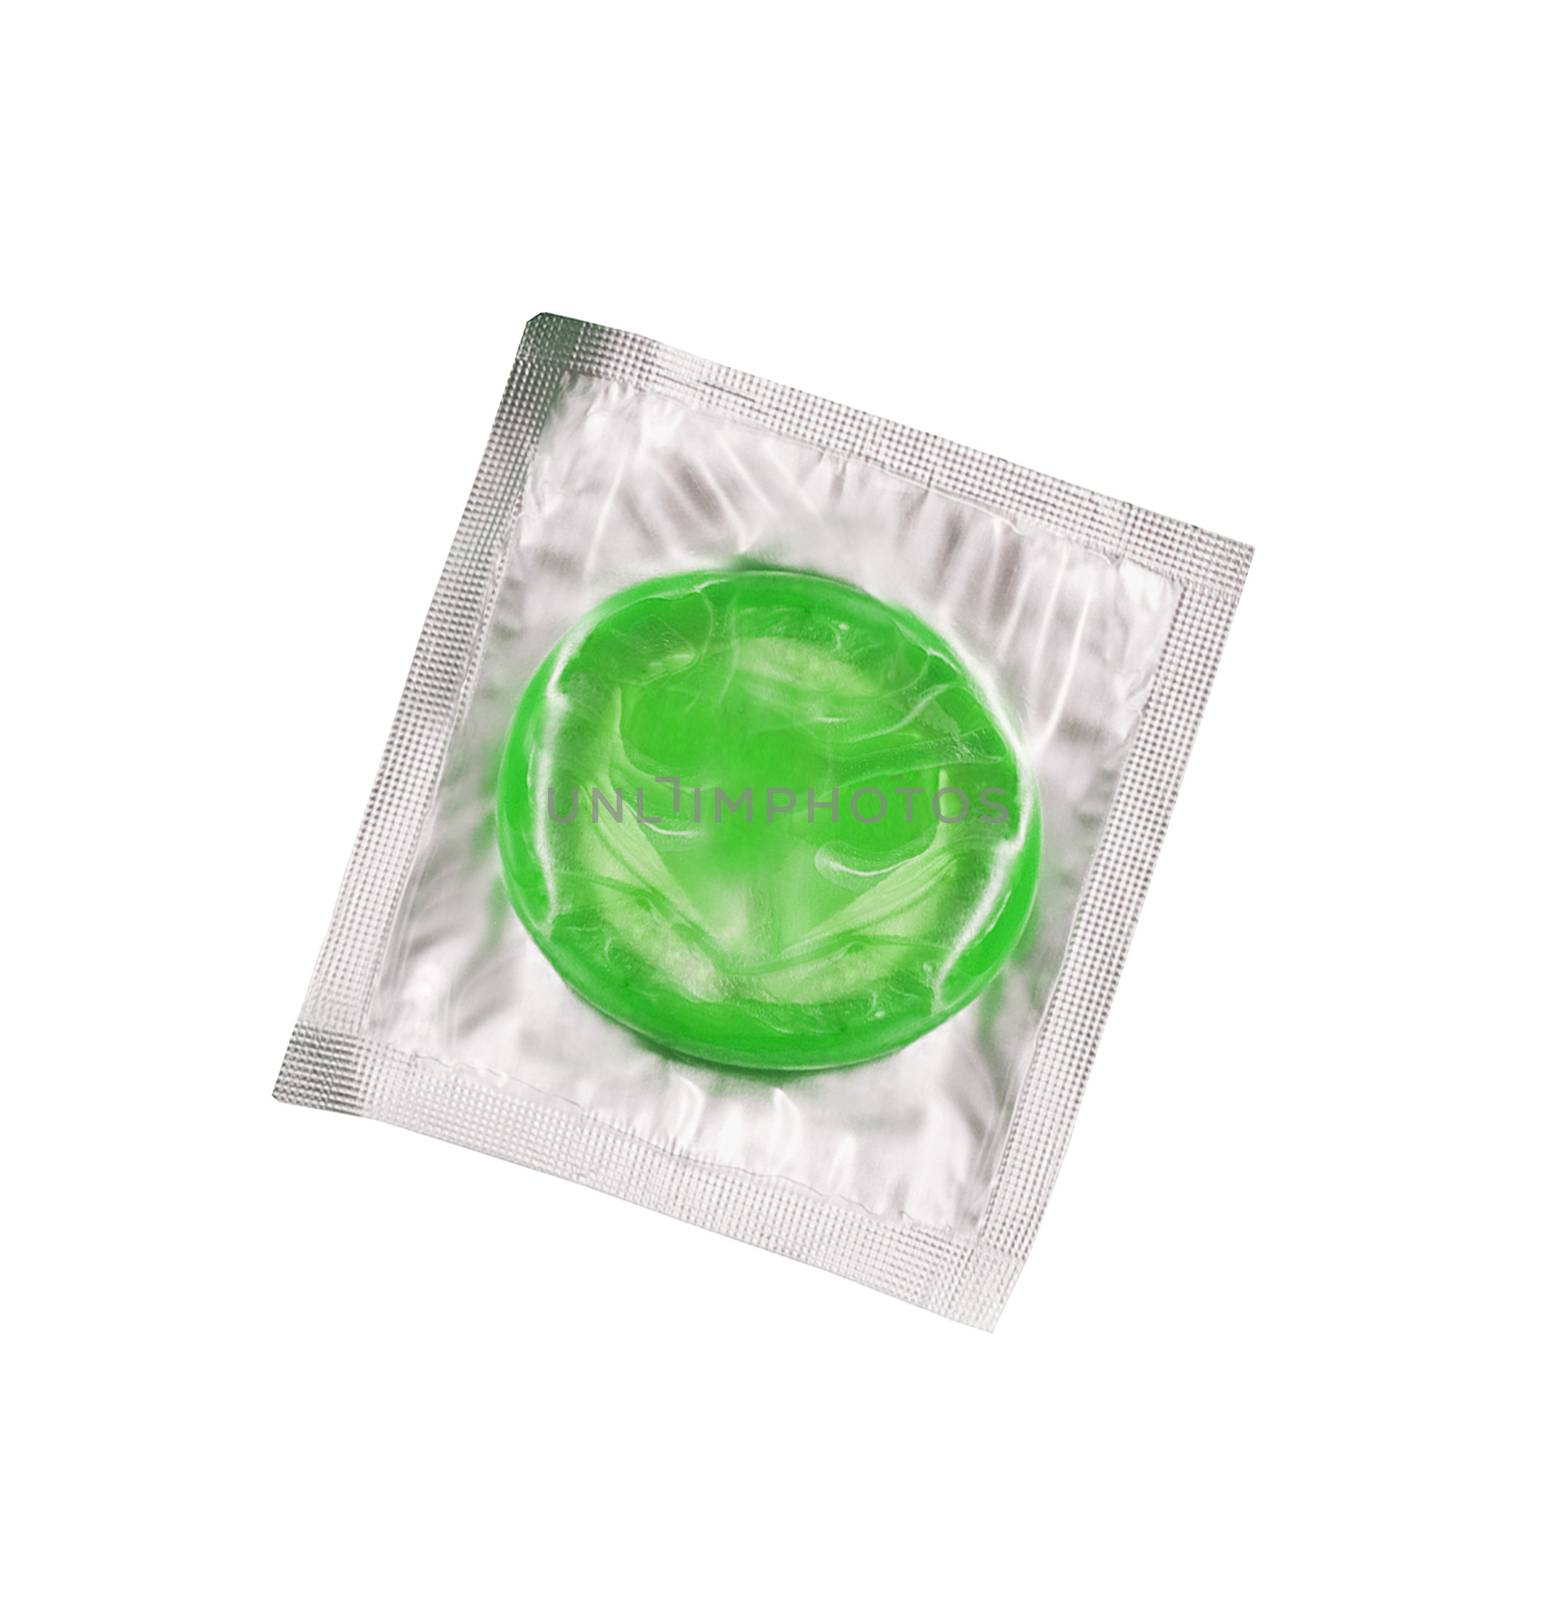 Condom isolated on white background by ozaiachin